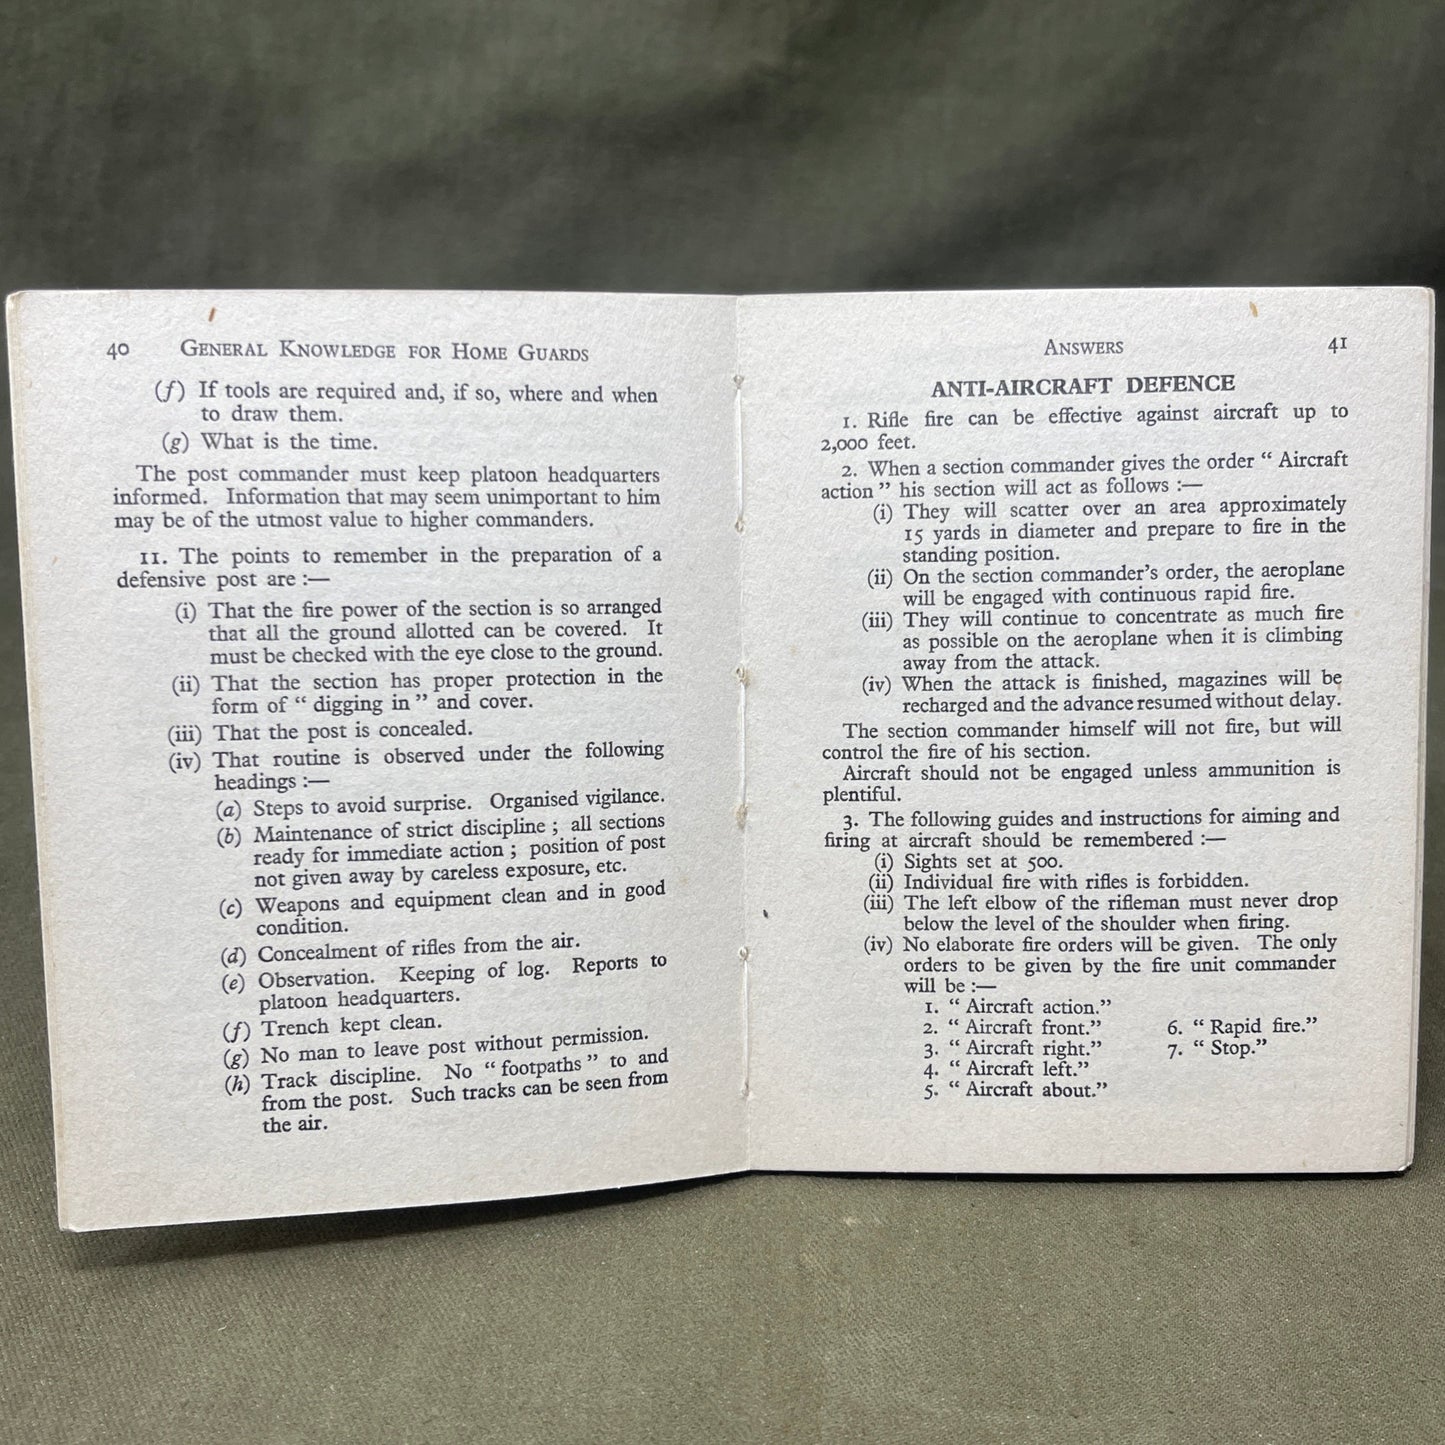 Original General Knowledge For Home Guards 1941